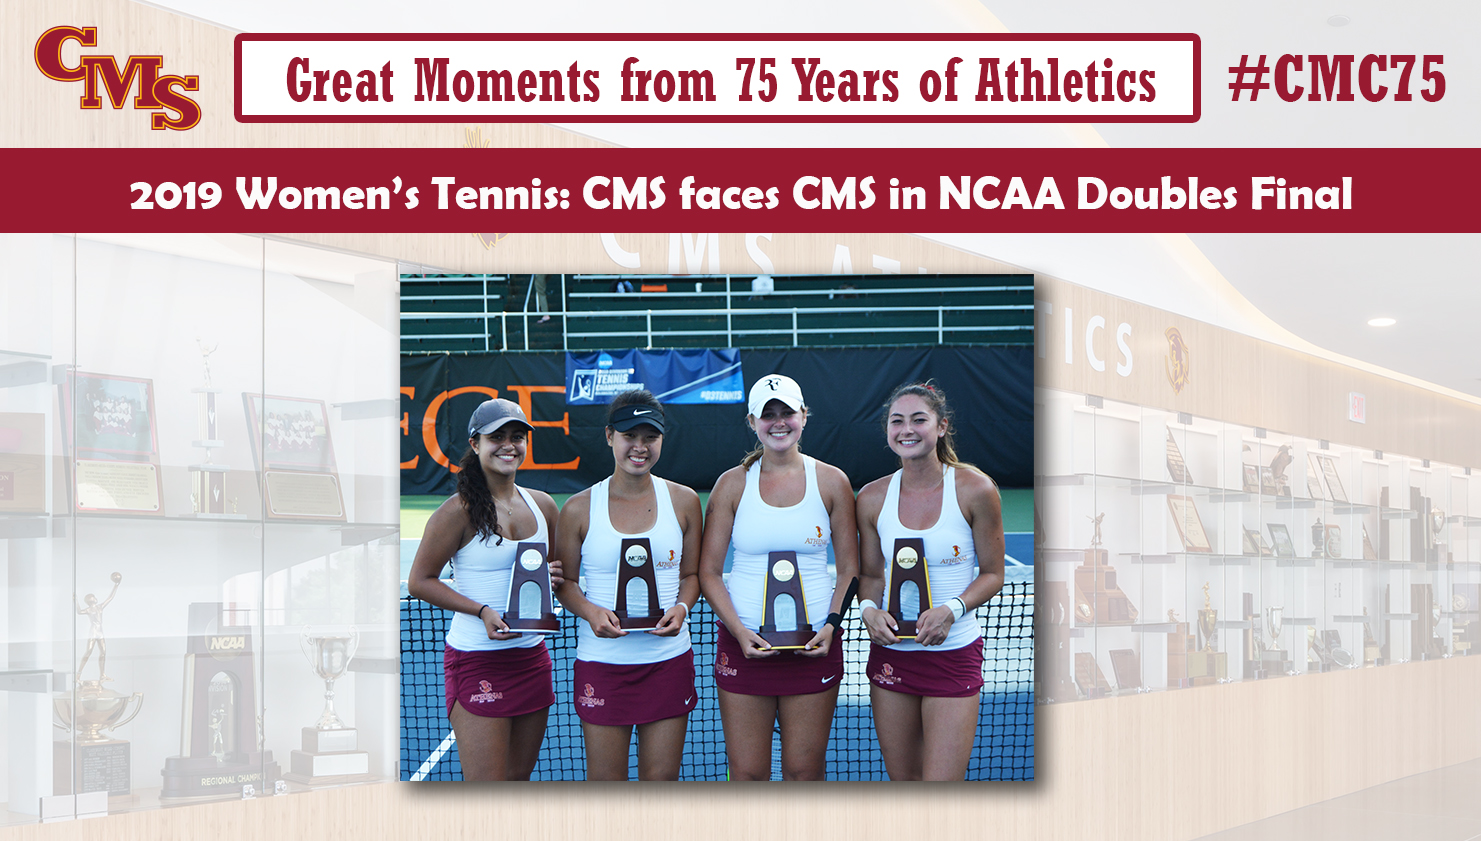 Sarah Bahsoun, Nicole Tan, Caroline Cox and Catherine Allen hold their NCAA trophies. Words over the photo read: Great Moments from 75 Years of Athletics. 2019 Women's Tennis: CMS faces CMS in NCAA Doubles Final